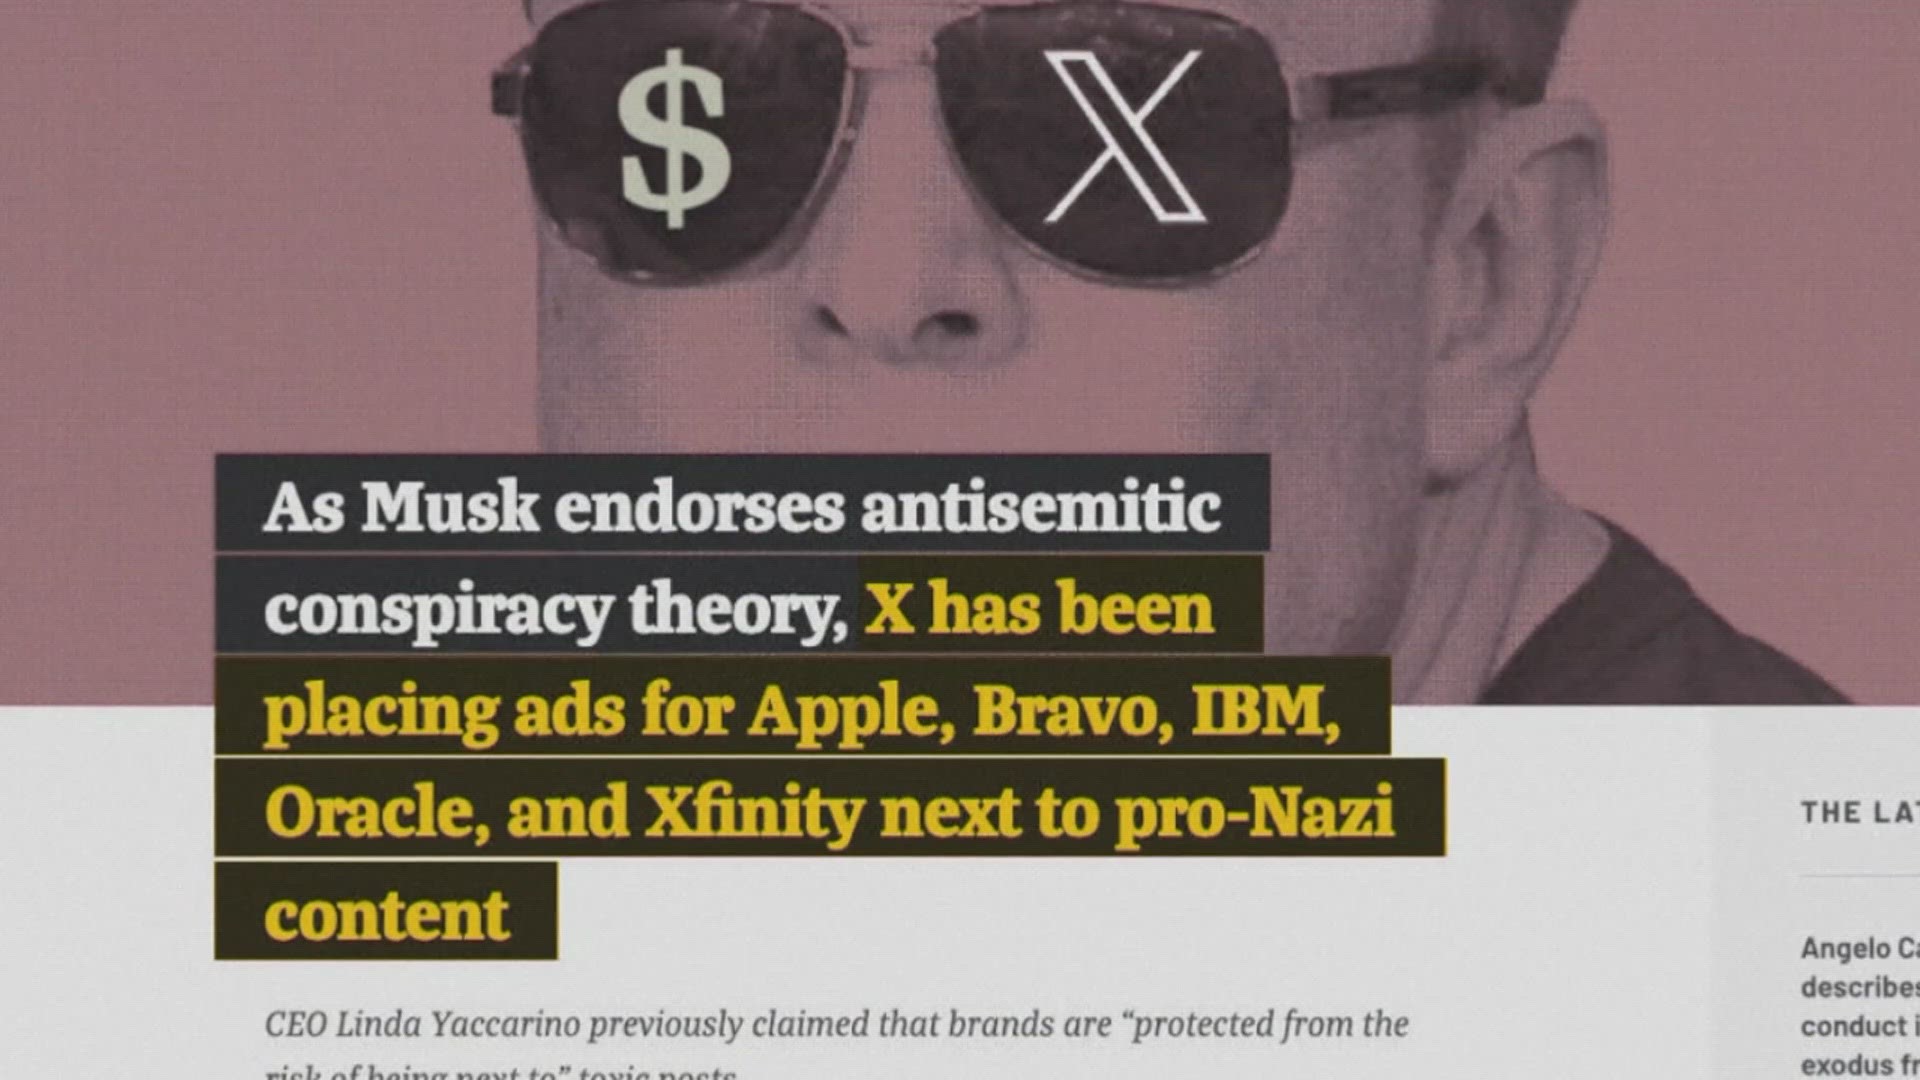 The Media Matters report pointed to ads from Apple and Oracle that also were placed next to antisemitic material on X.